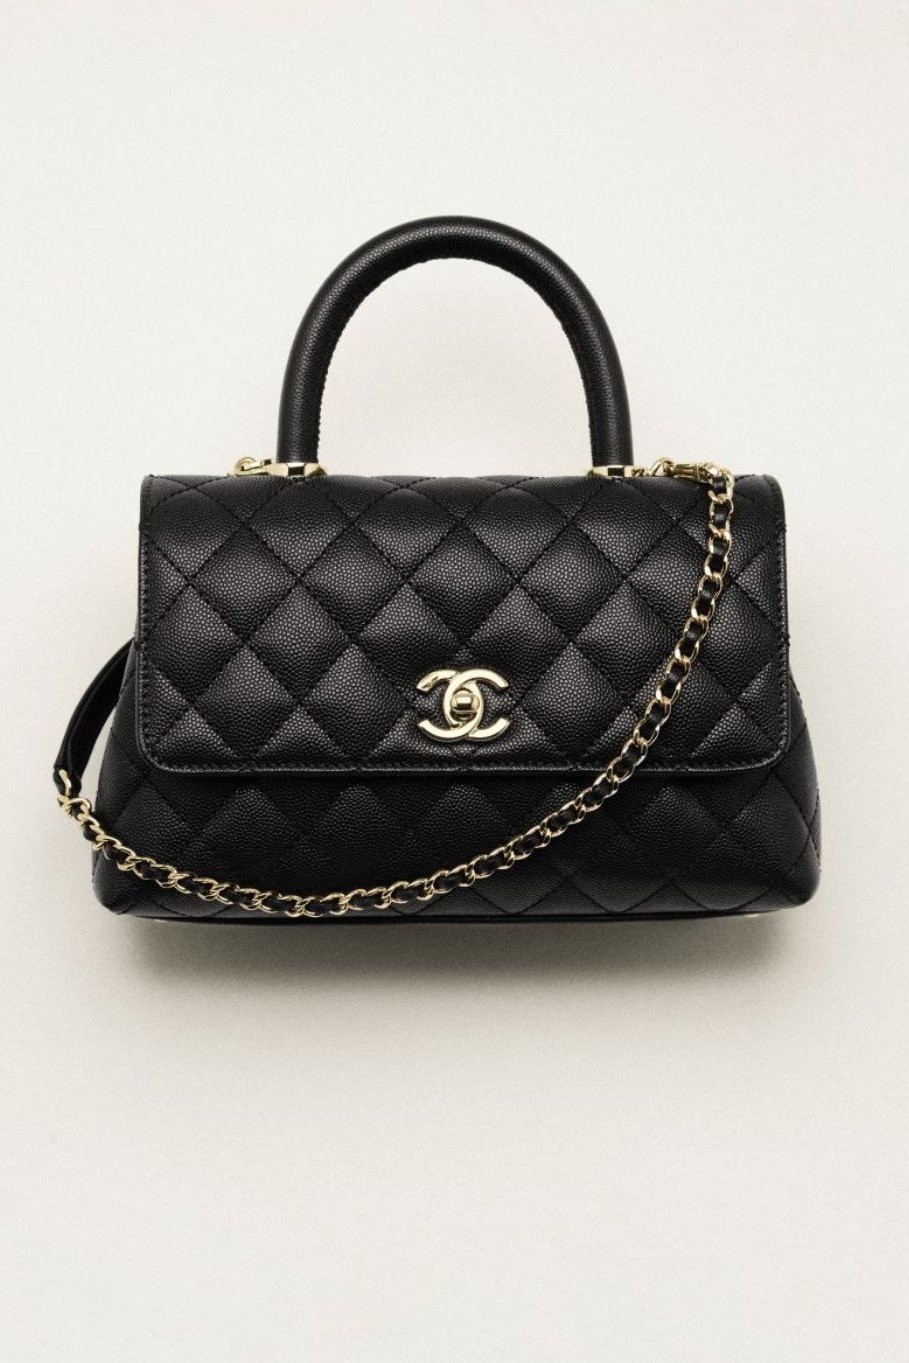 Chanel - FLAP BAG WITH TOP HANDLE - Black